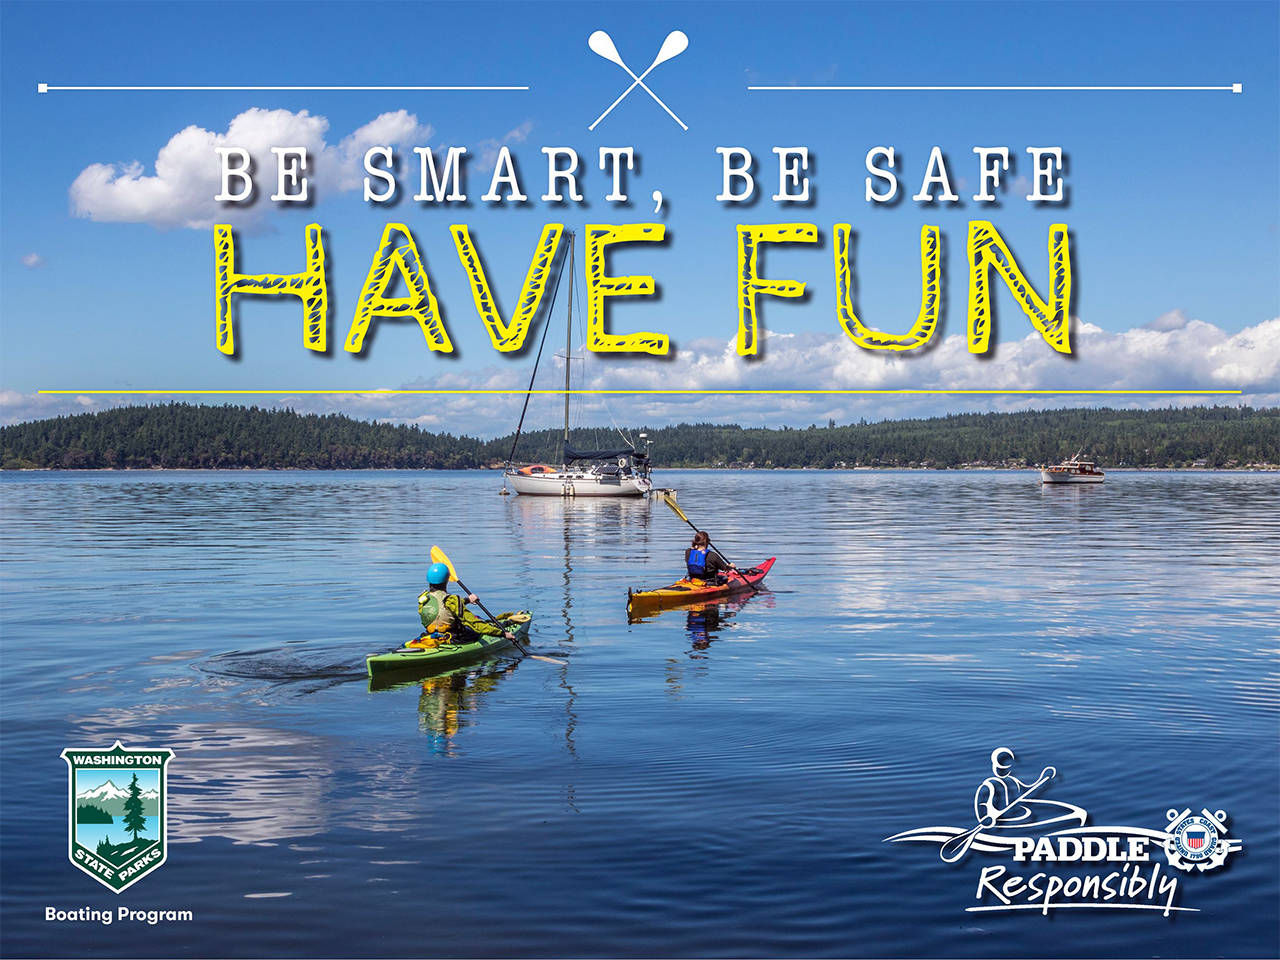 Get on board with safety during Paddle Safe Week, July 19-25